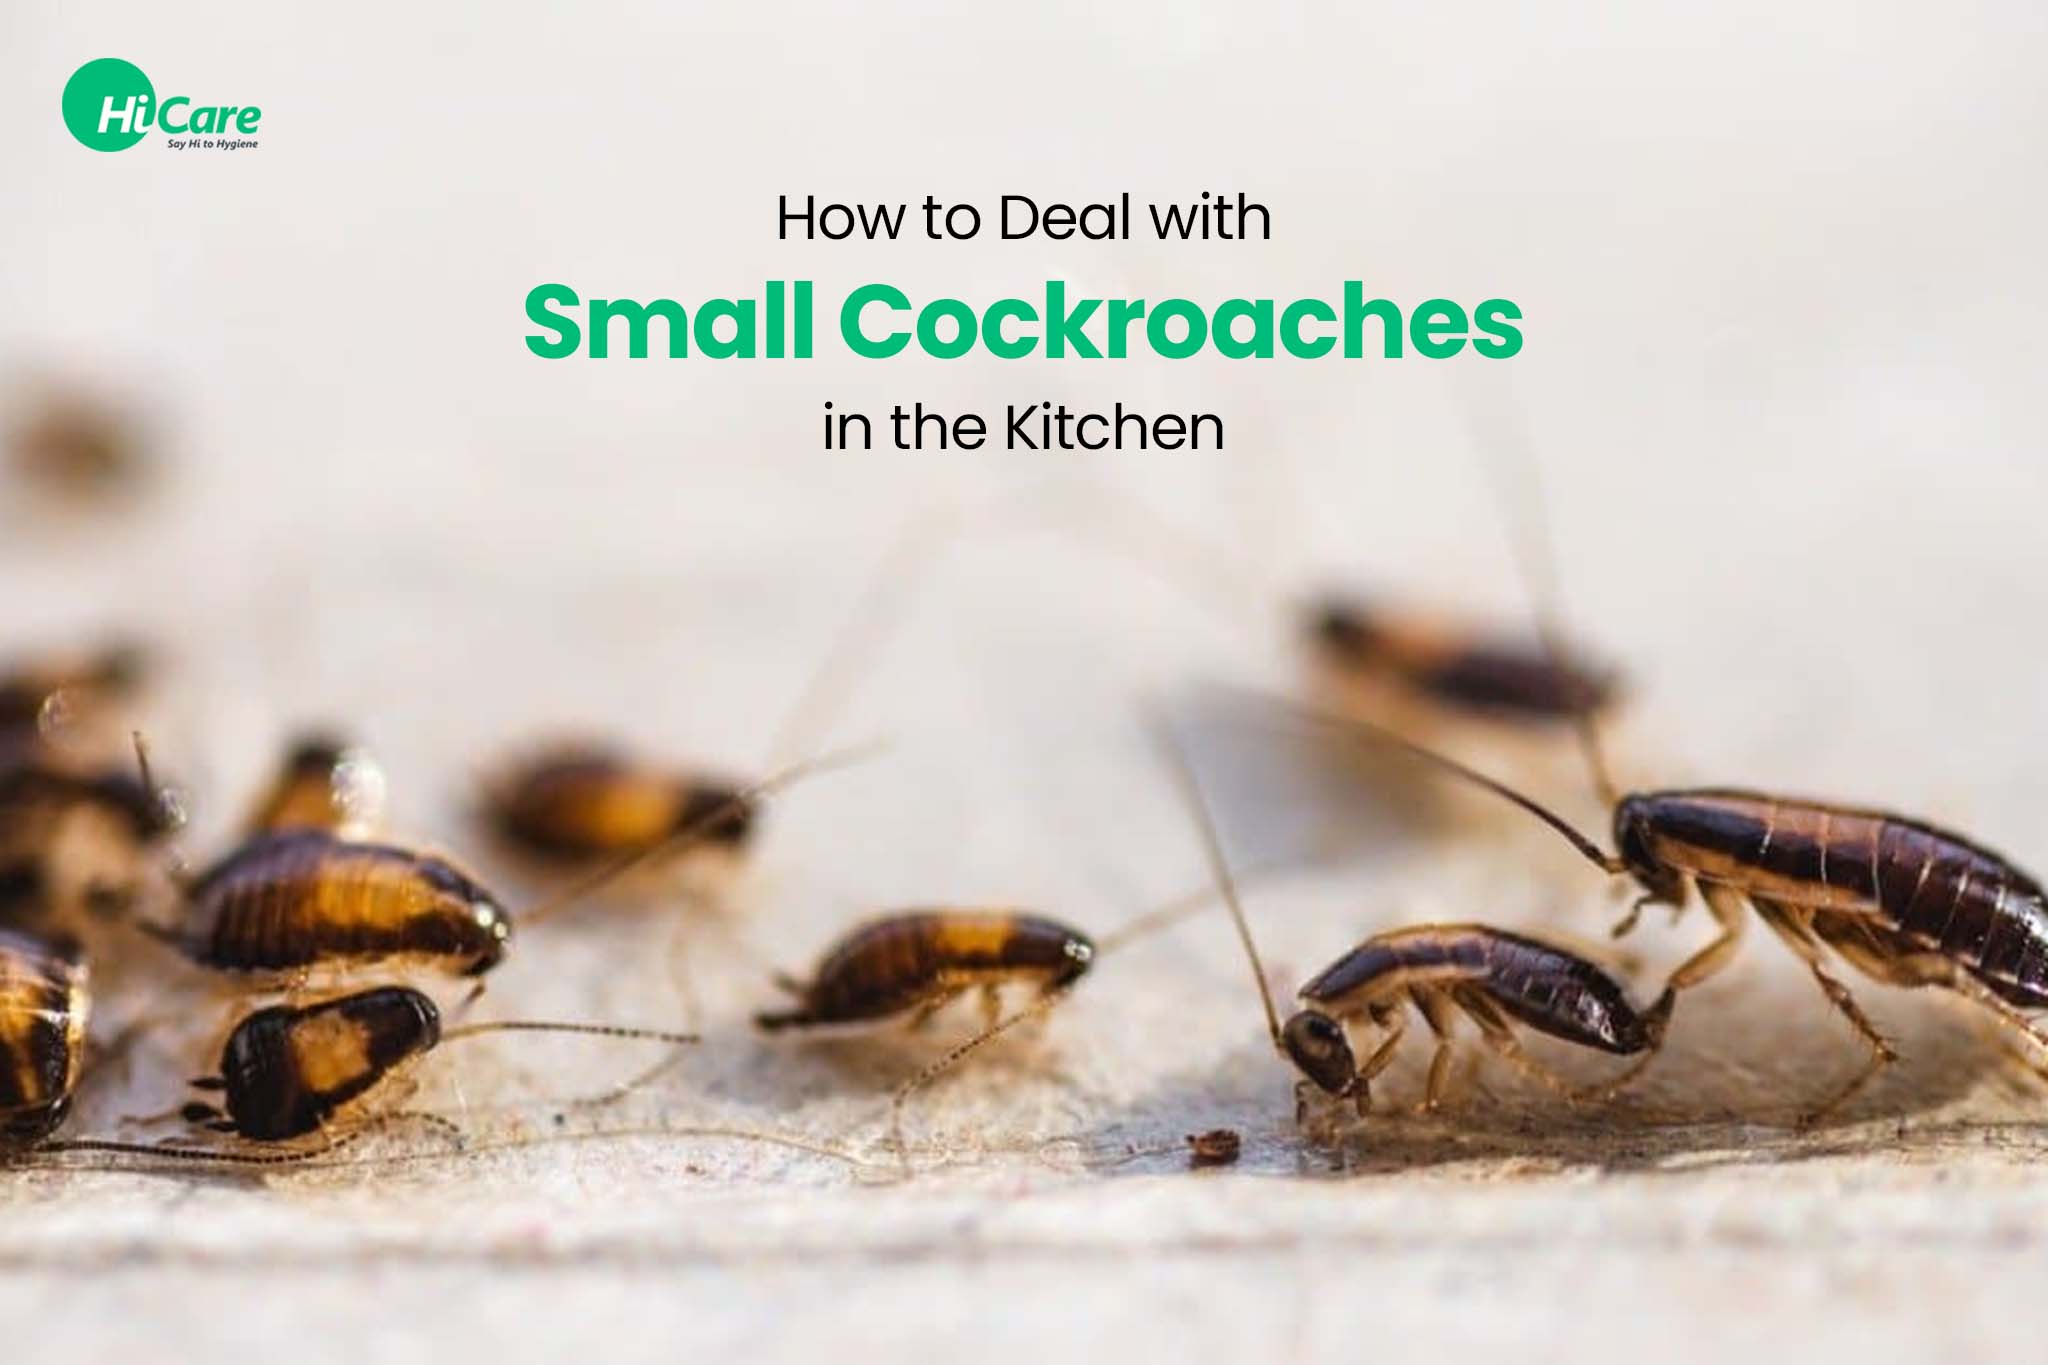 How to deal with small cockroaches in kitchen?